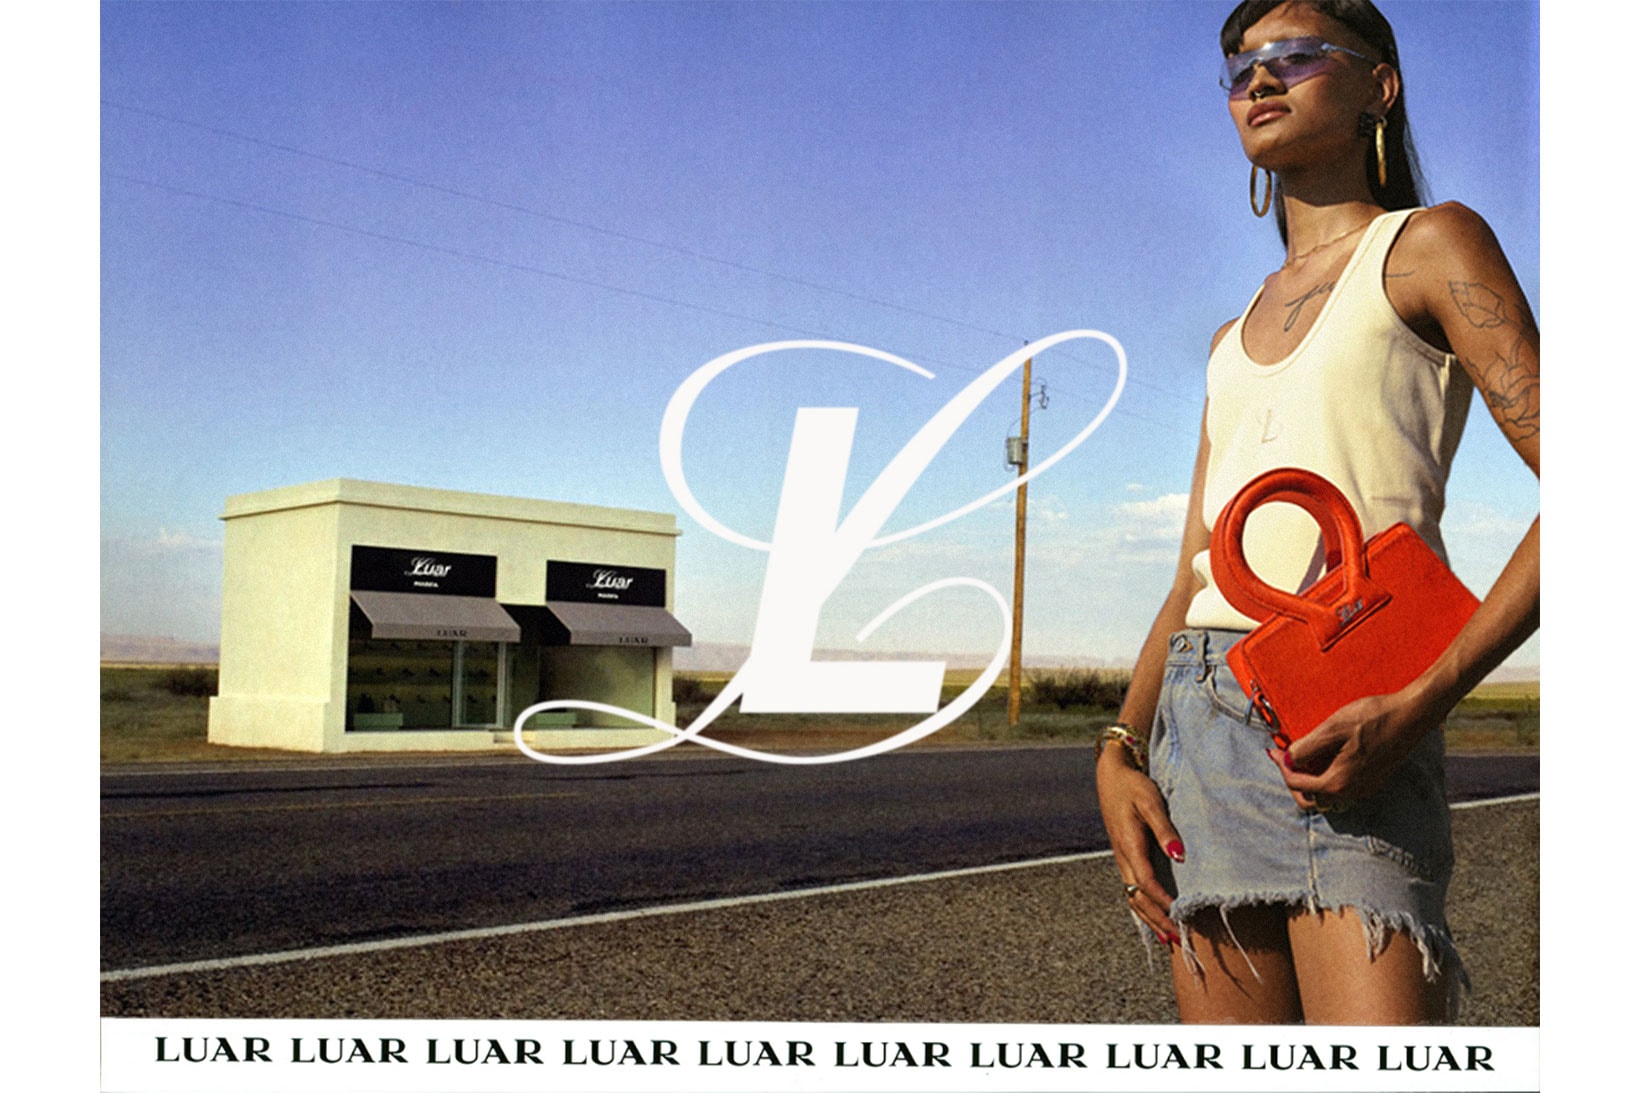 LUAR Ana Bag Orange Pony Hair Colorway Limited Edition Campaign Release Pop-up Info